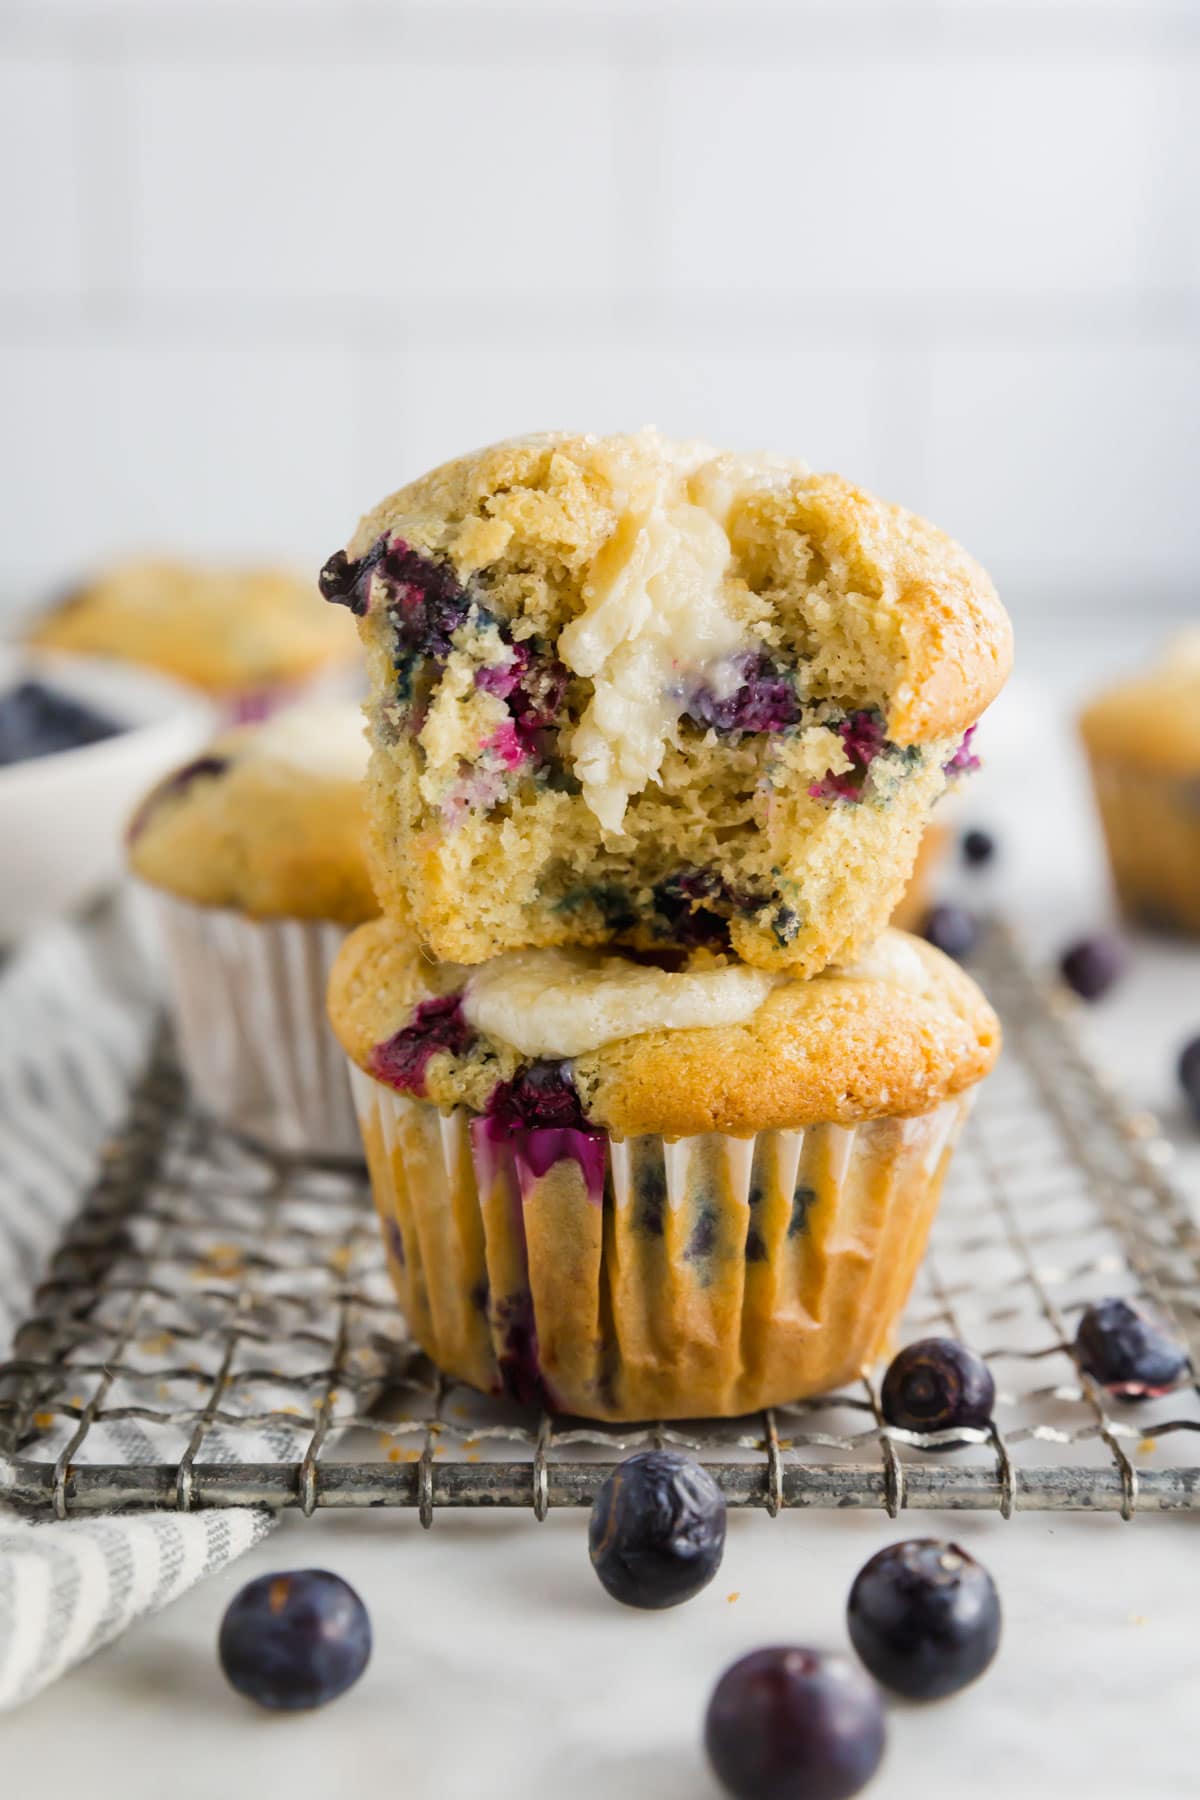 A photo of two gluten-free blueberry cheesecake muffins stacked on top of each other. The top one has a bite taken out of it.